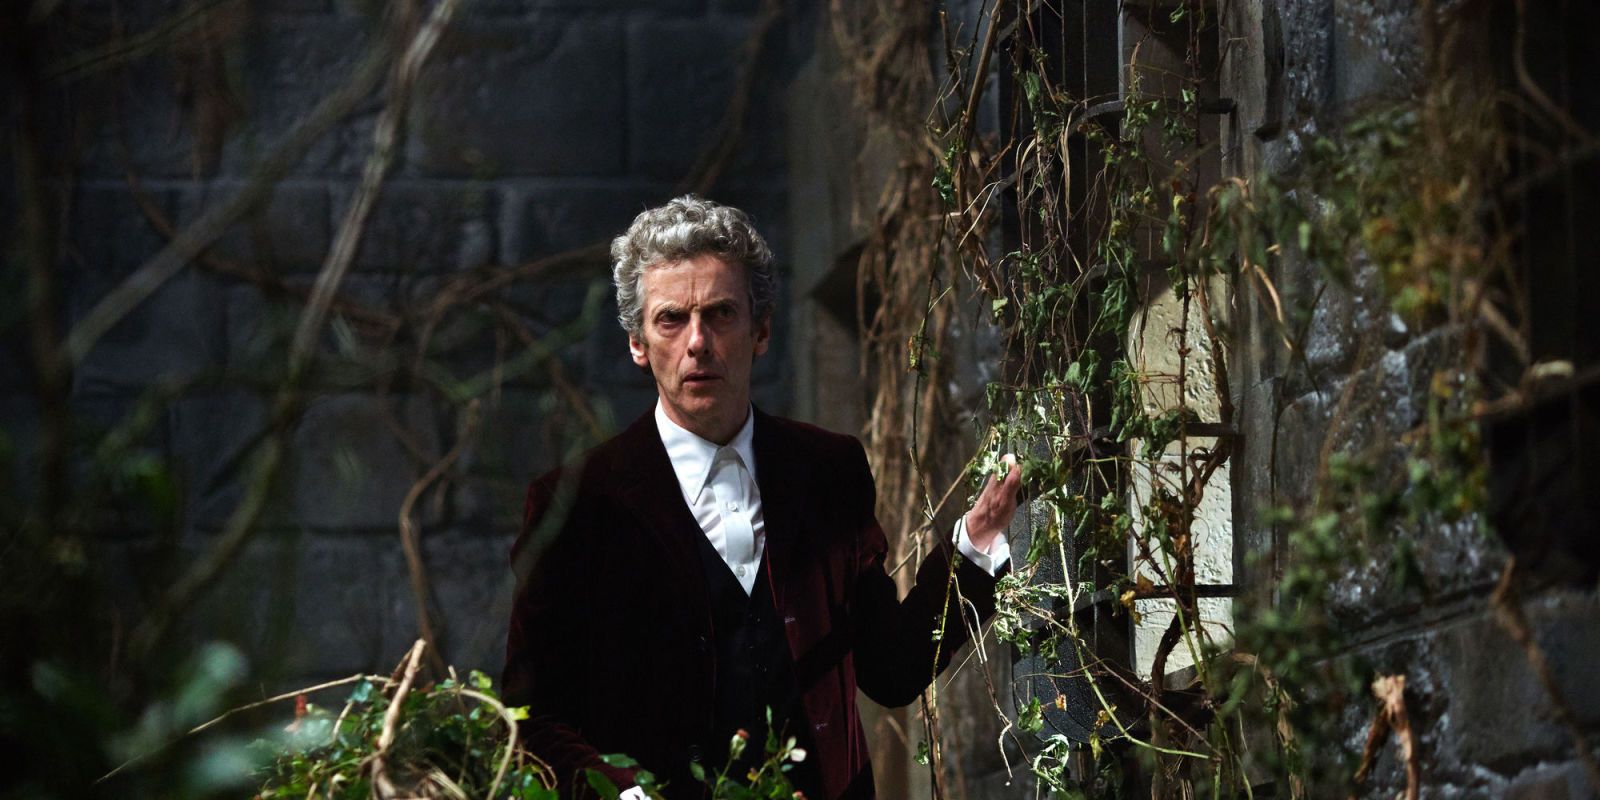 Peter Capaldi as The Doctor in Doctor Who series 9